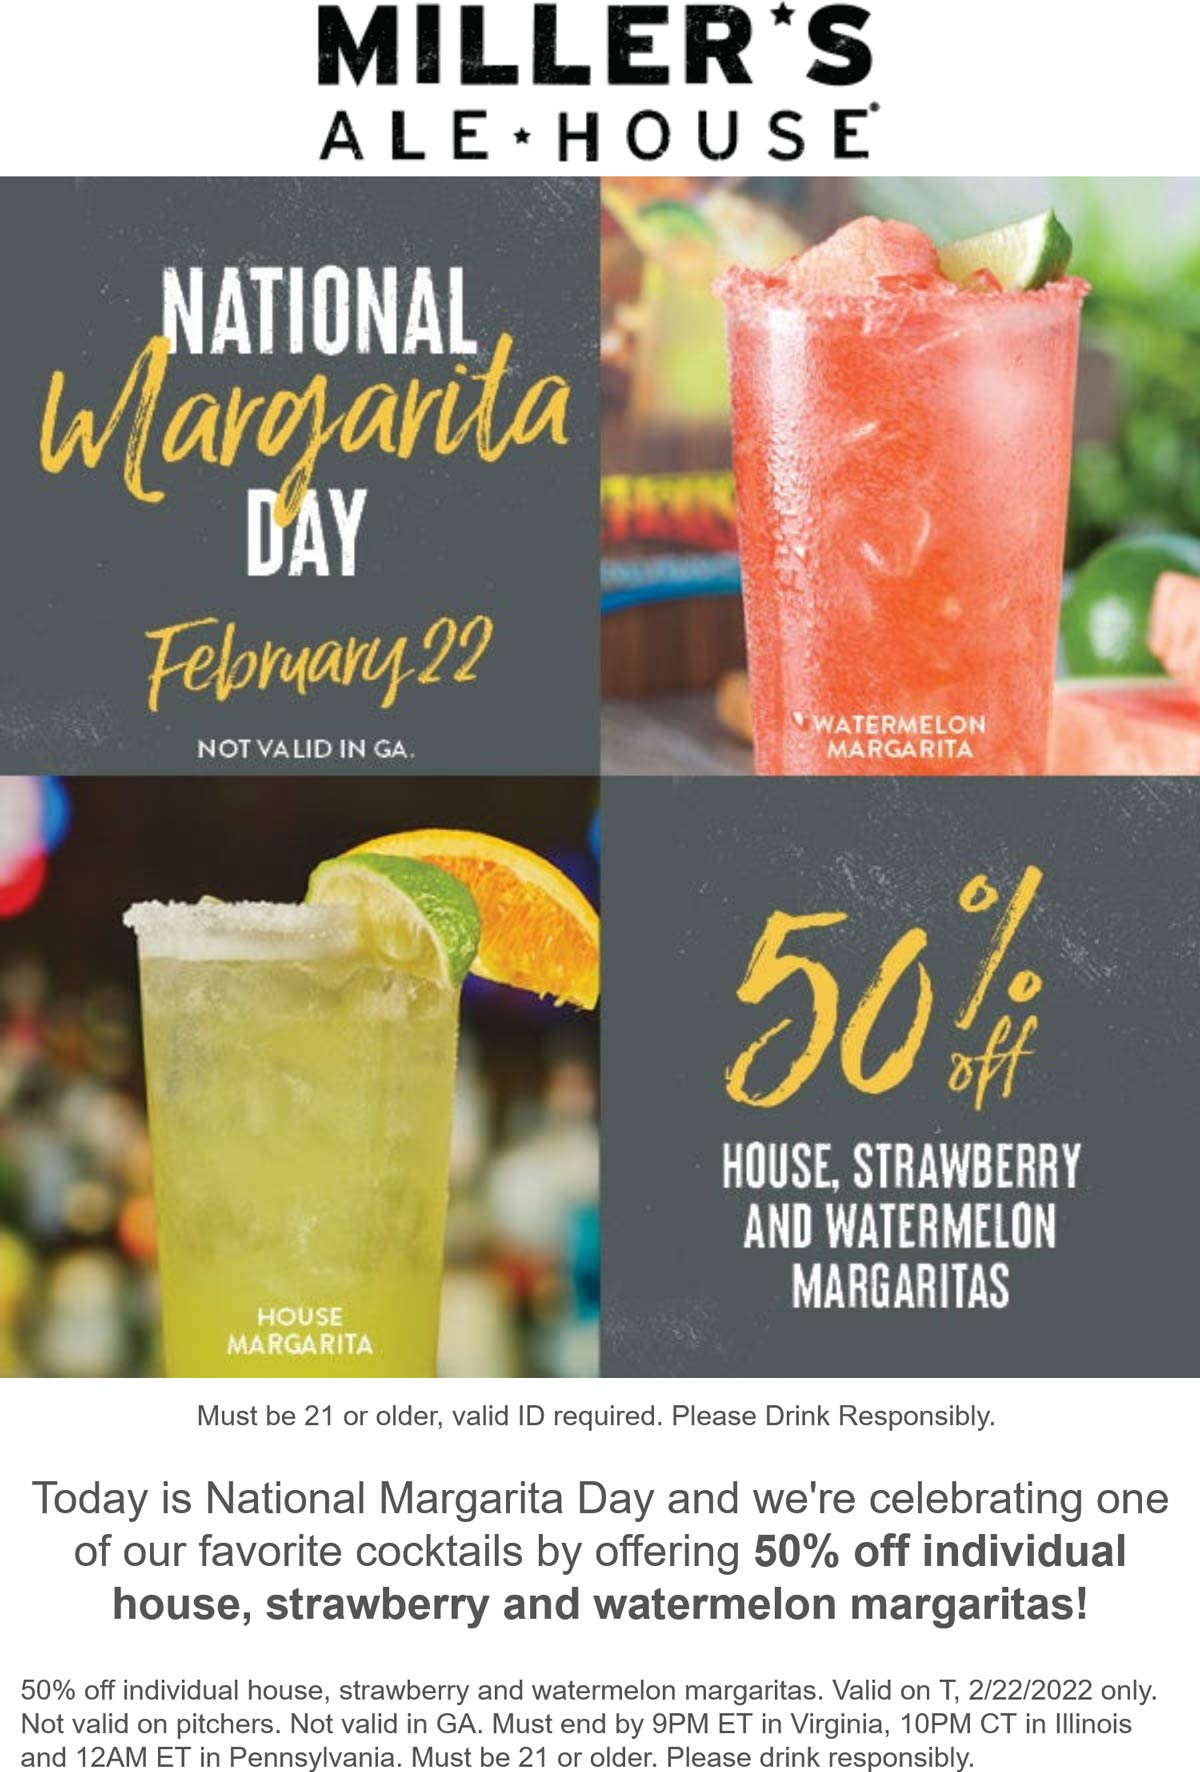 Millers Ale House restaurants Coupon  50% off margaritas today at Millers Ale House restaurants #millersalehouse 